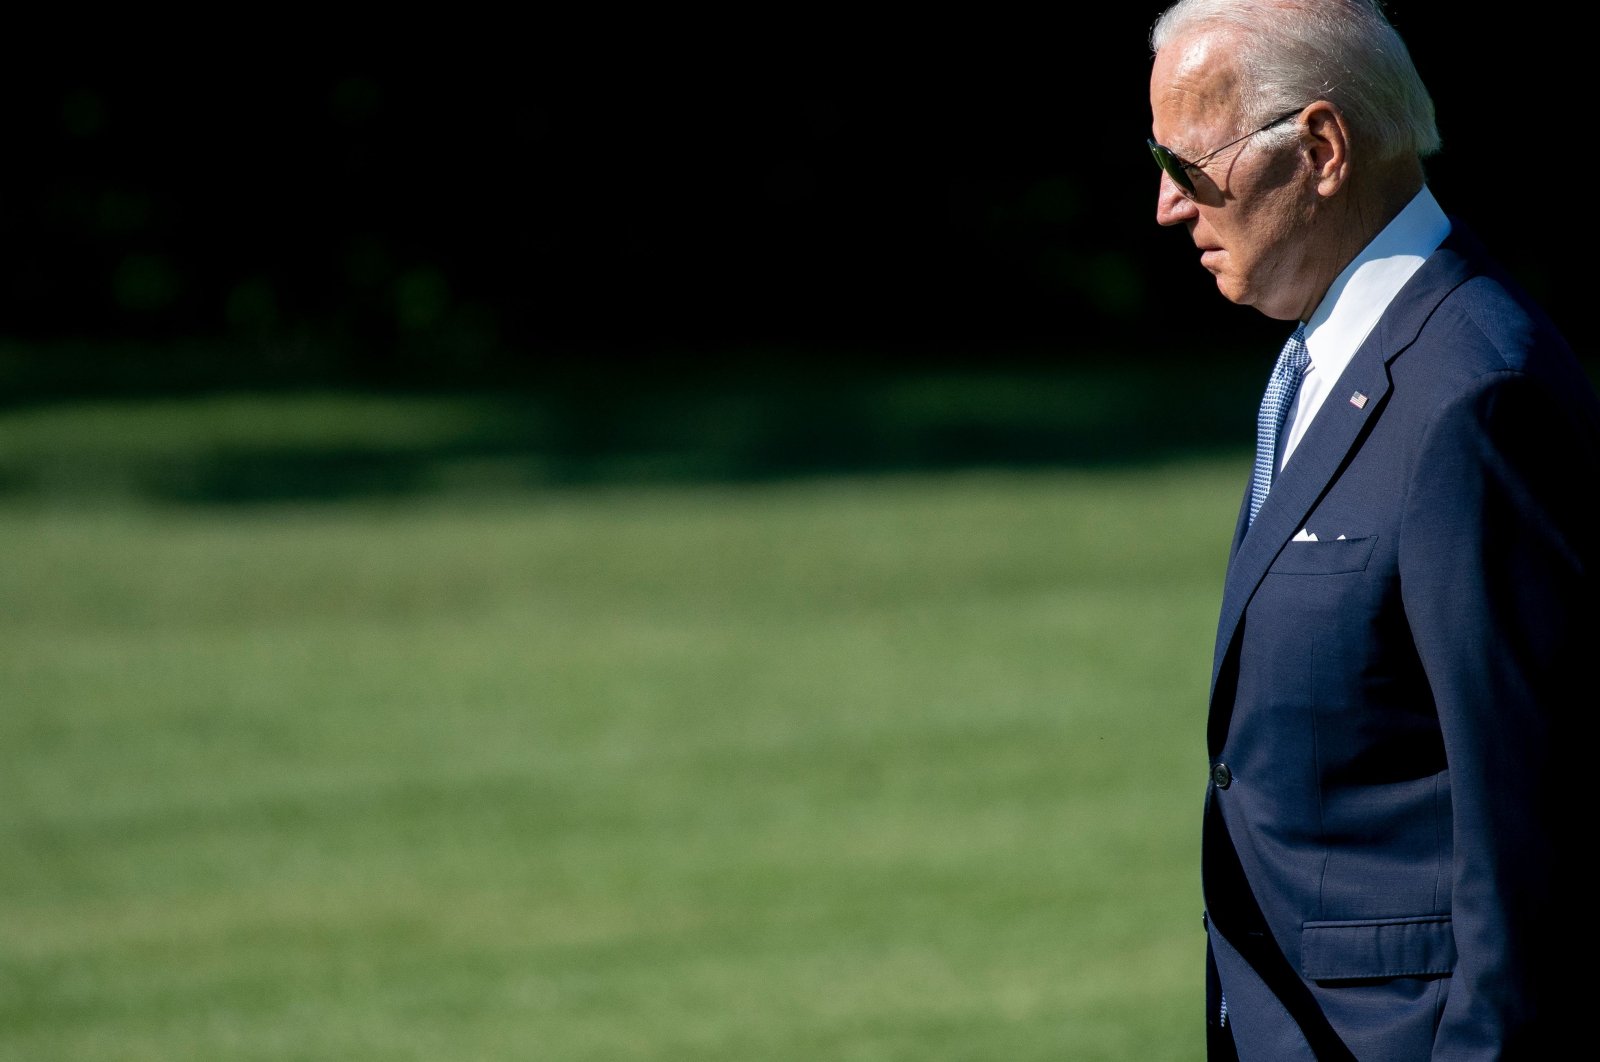 U.S. President Joe Biden walks to Marine One on the South Lawn of the White House as he departs for Germany to attend the G-7 meeting, Washington, D.C., U.S., June 25, 2022. (AFP Photo)